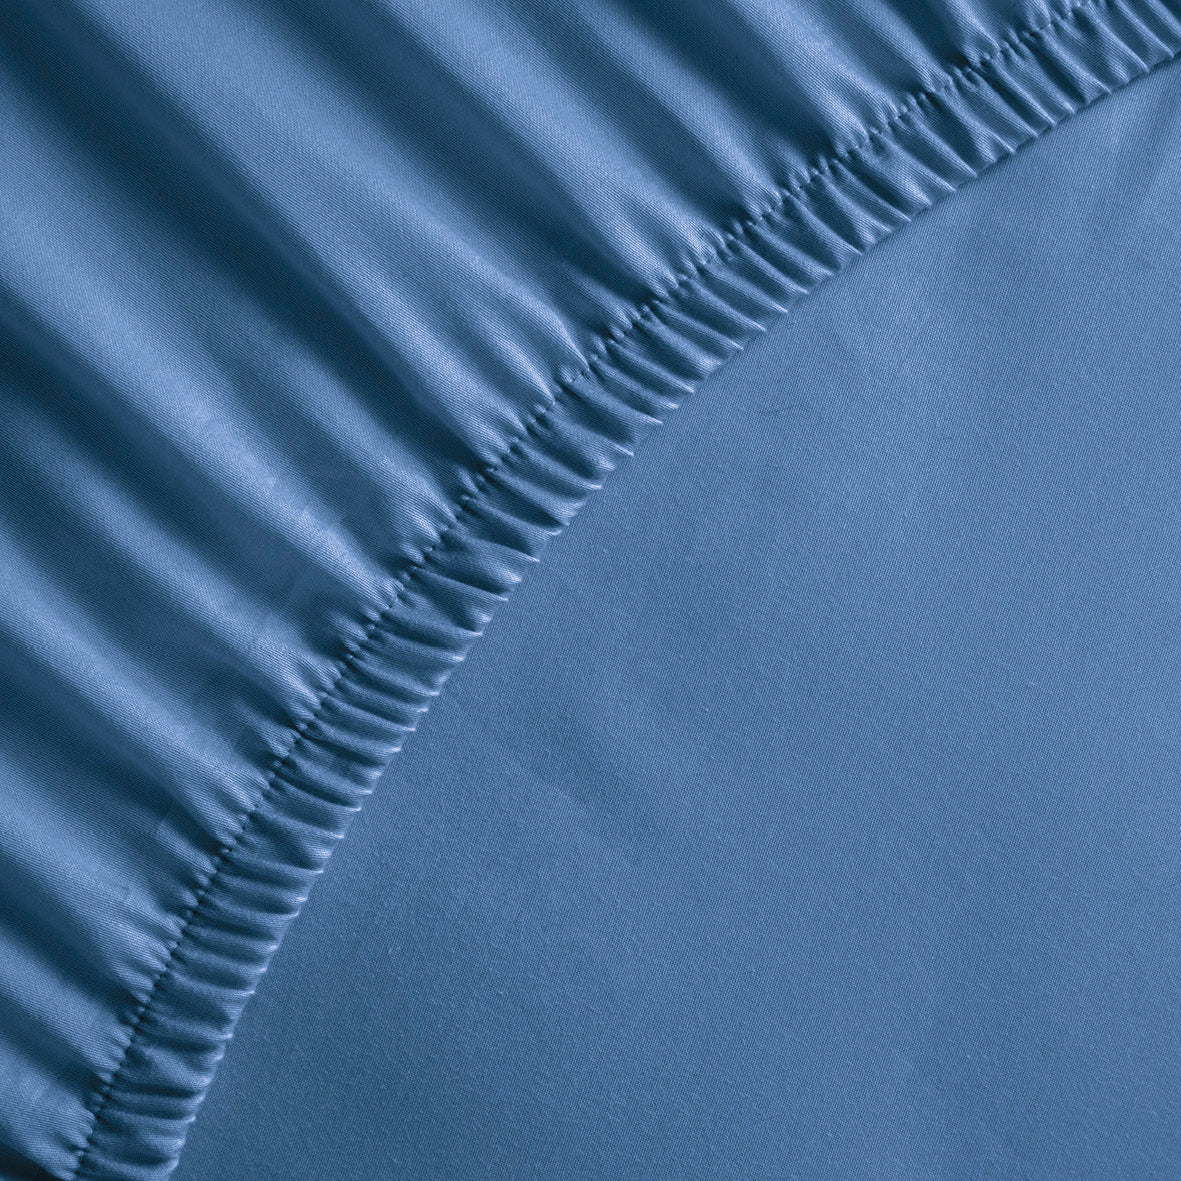 Fitted sheet cotton satin - Blue